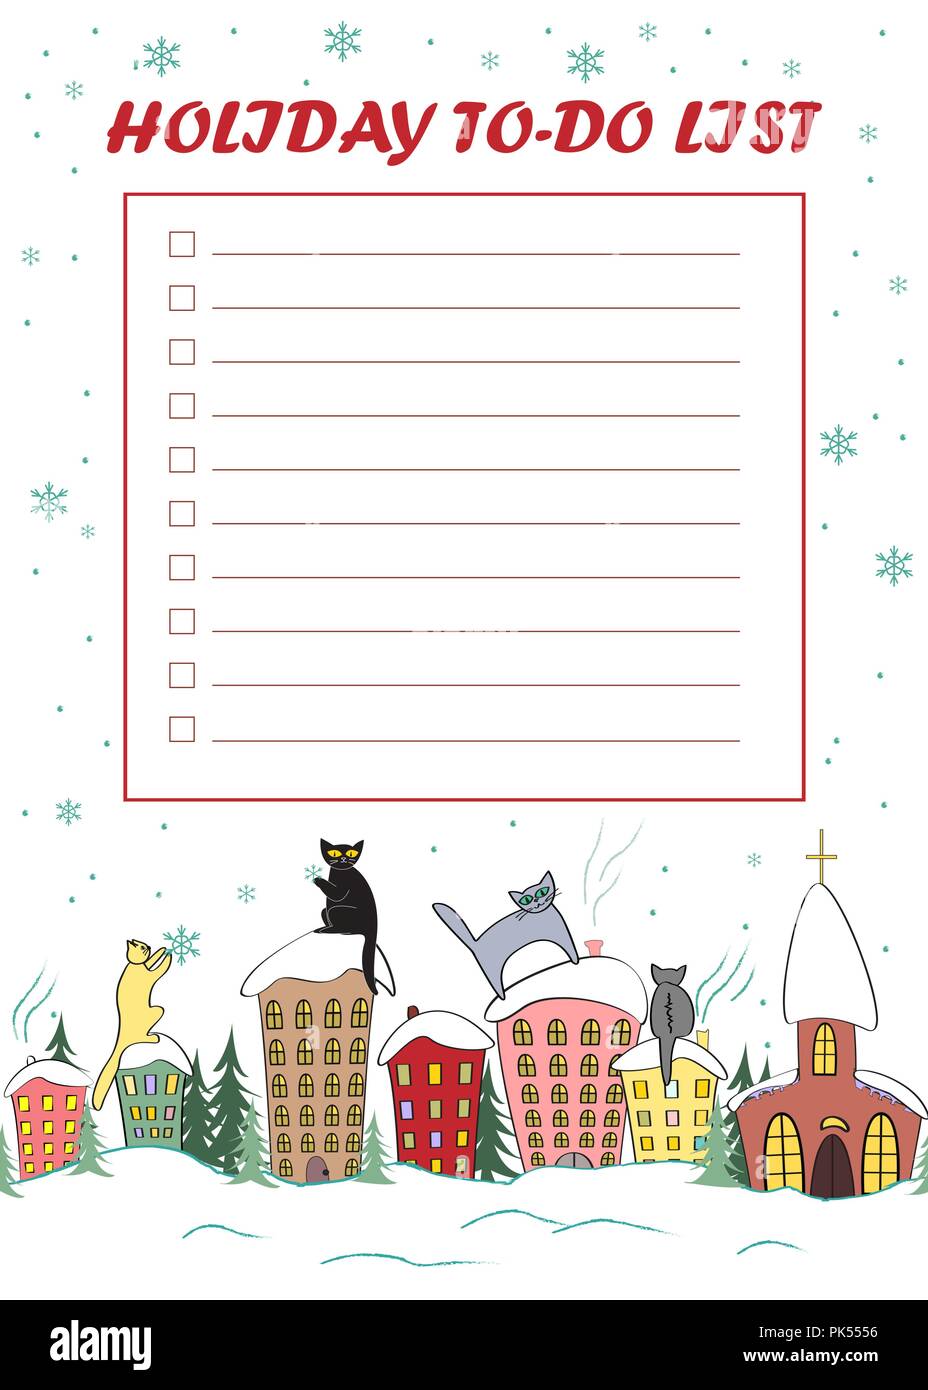 Christmas To Do List. Candy cane frame with cute cats sitting on the roofs and looking at snow. Stock Vector